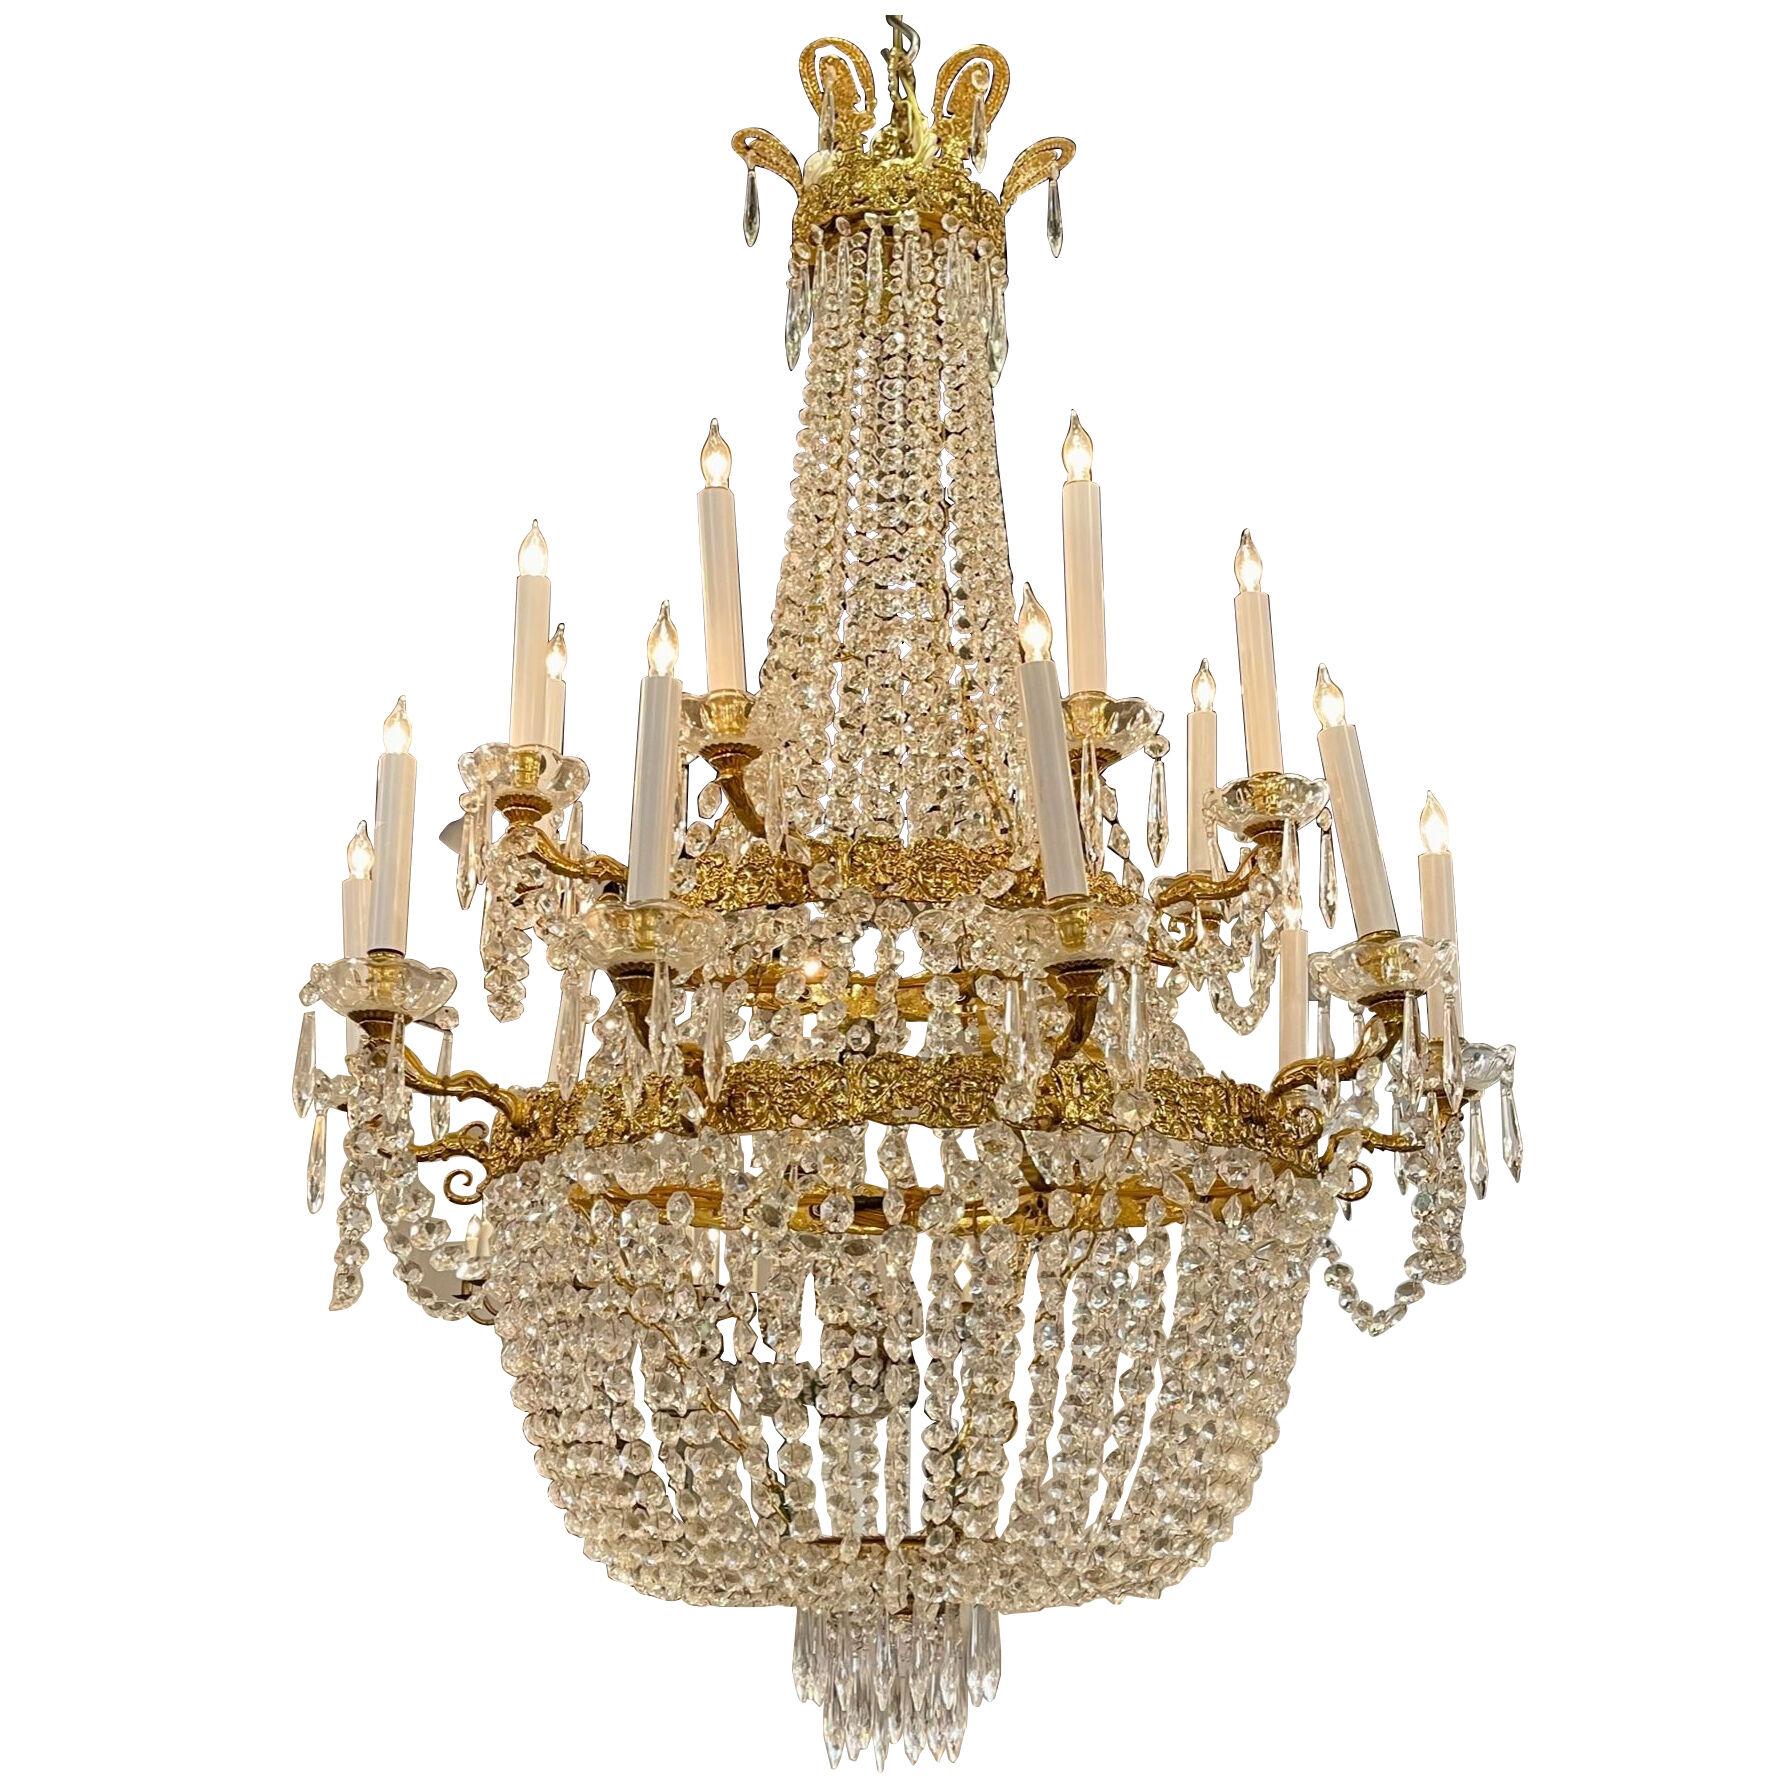 French Empire Style Gilt Brass and Crystal Basket Chandelier with 18 Lights